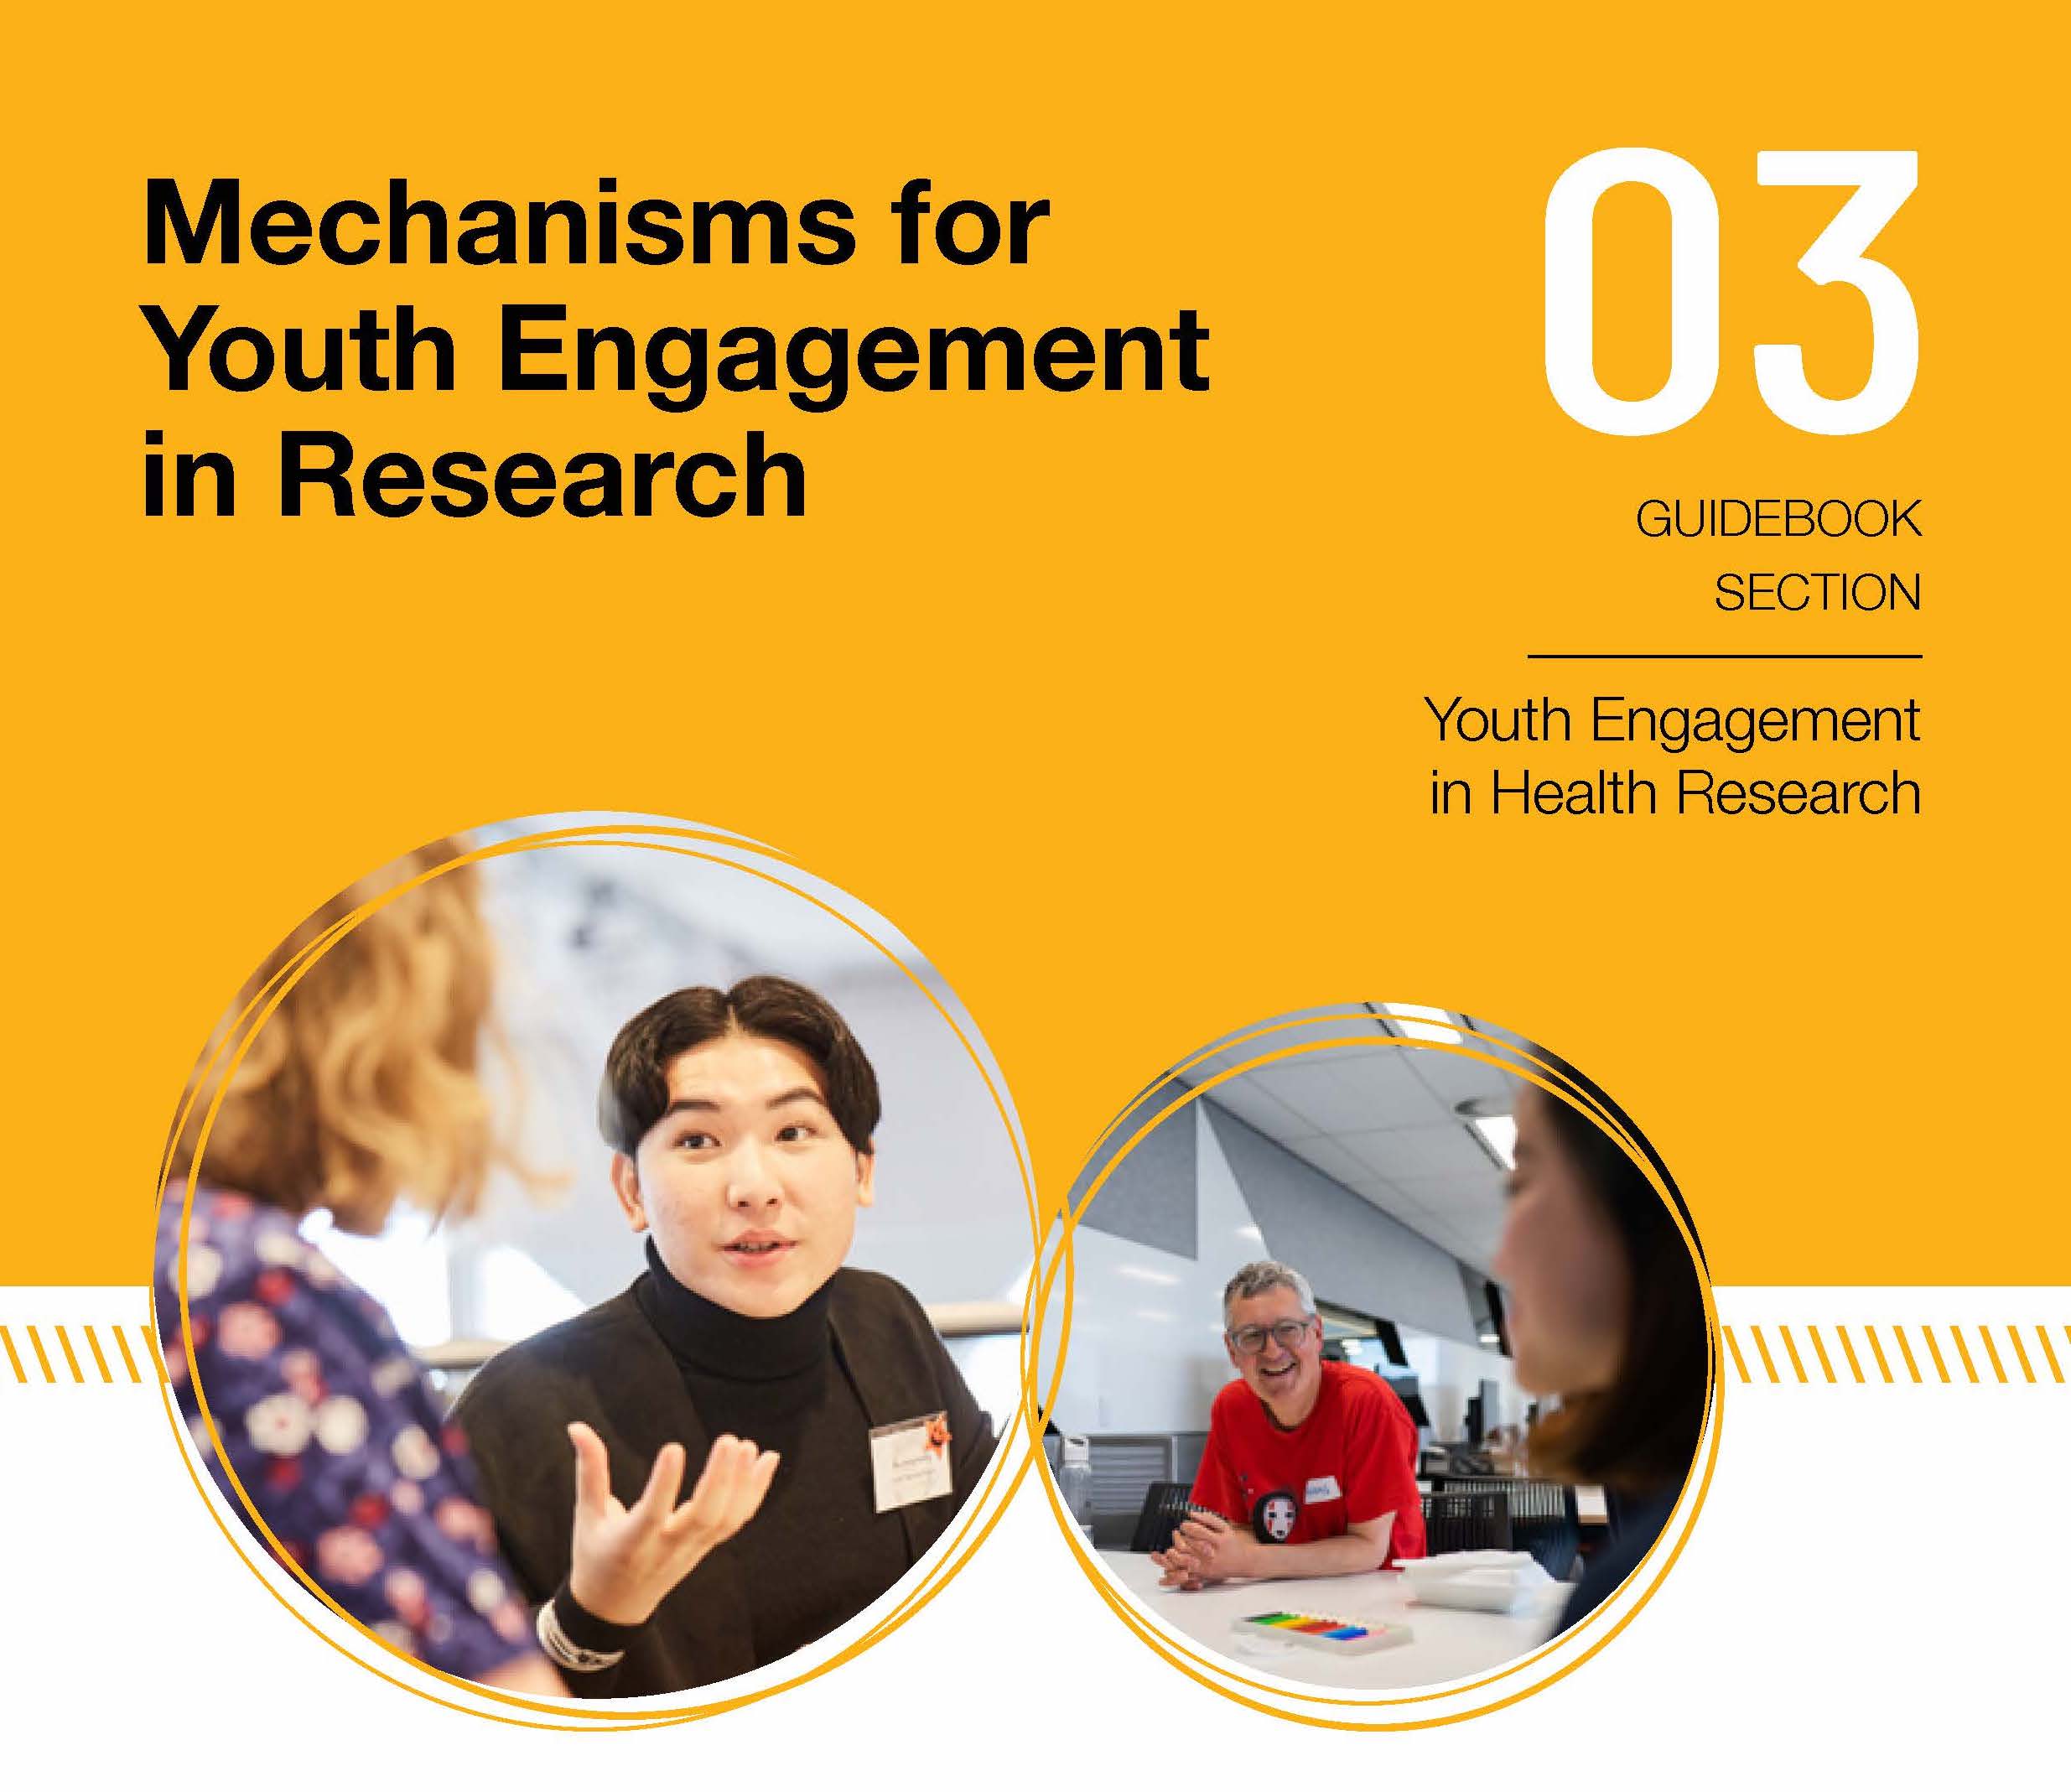 Mechanisms for Youth Engagement in Research